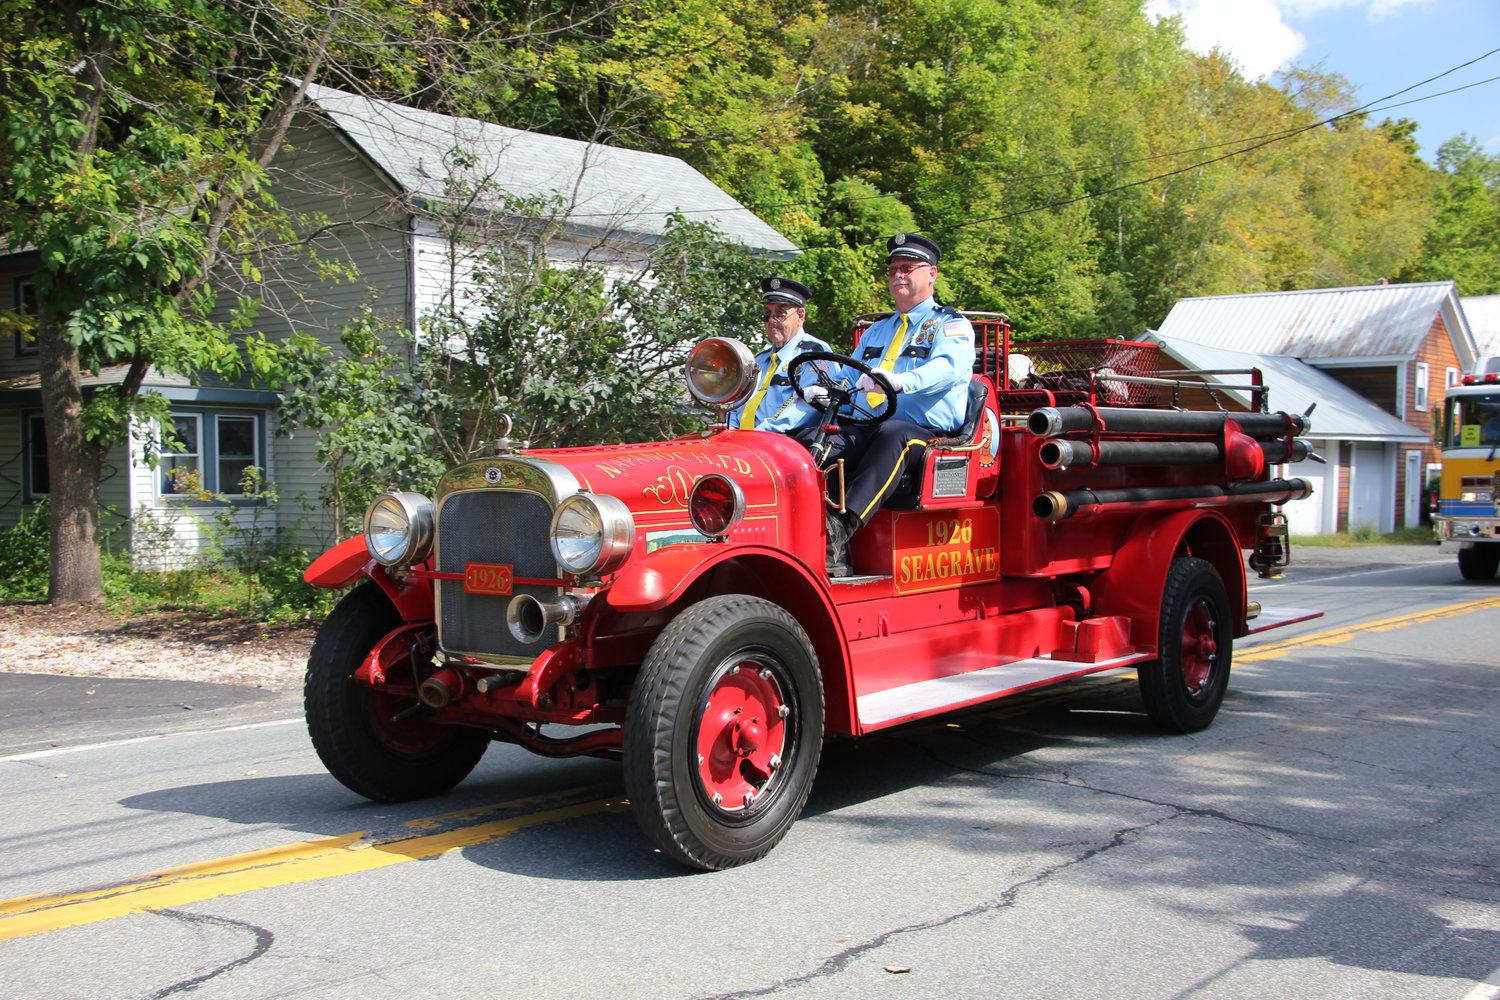 Many fire departments delight in showing off their antique equipment, such as this 1926 Seagrave proudly owned by Napanoch.